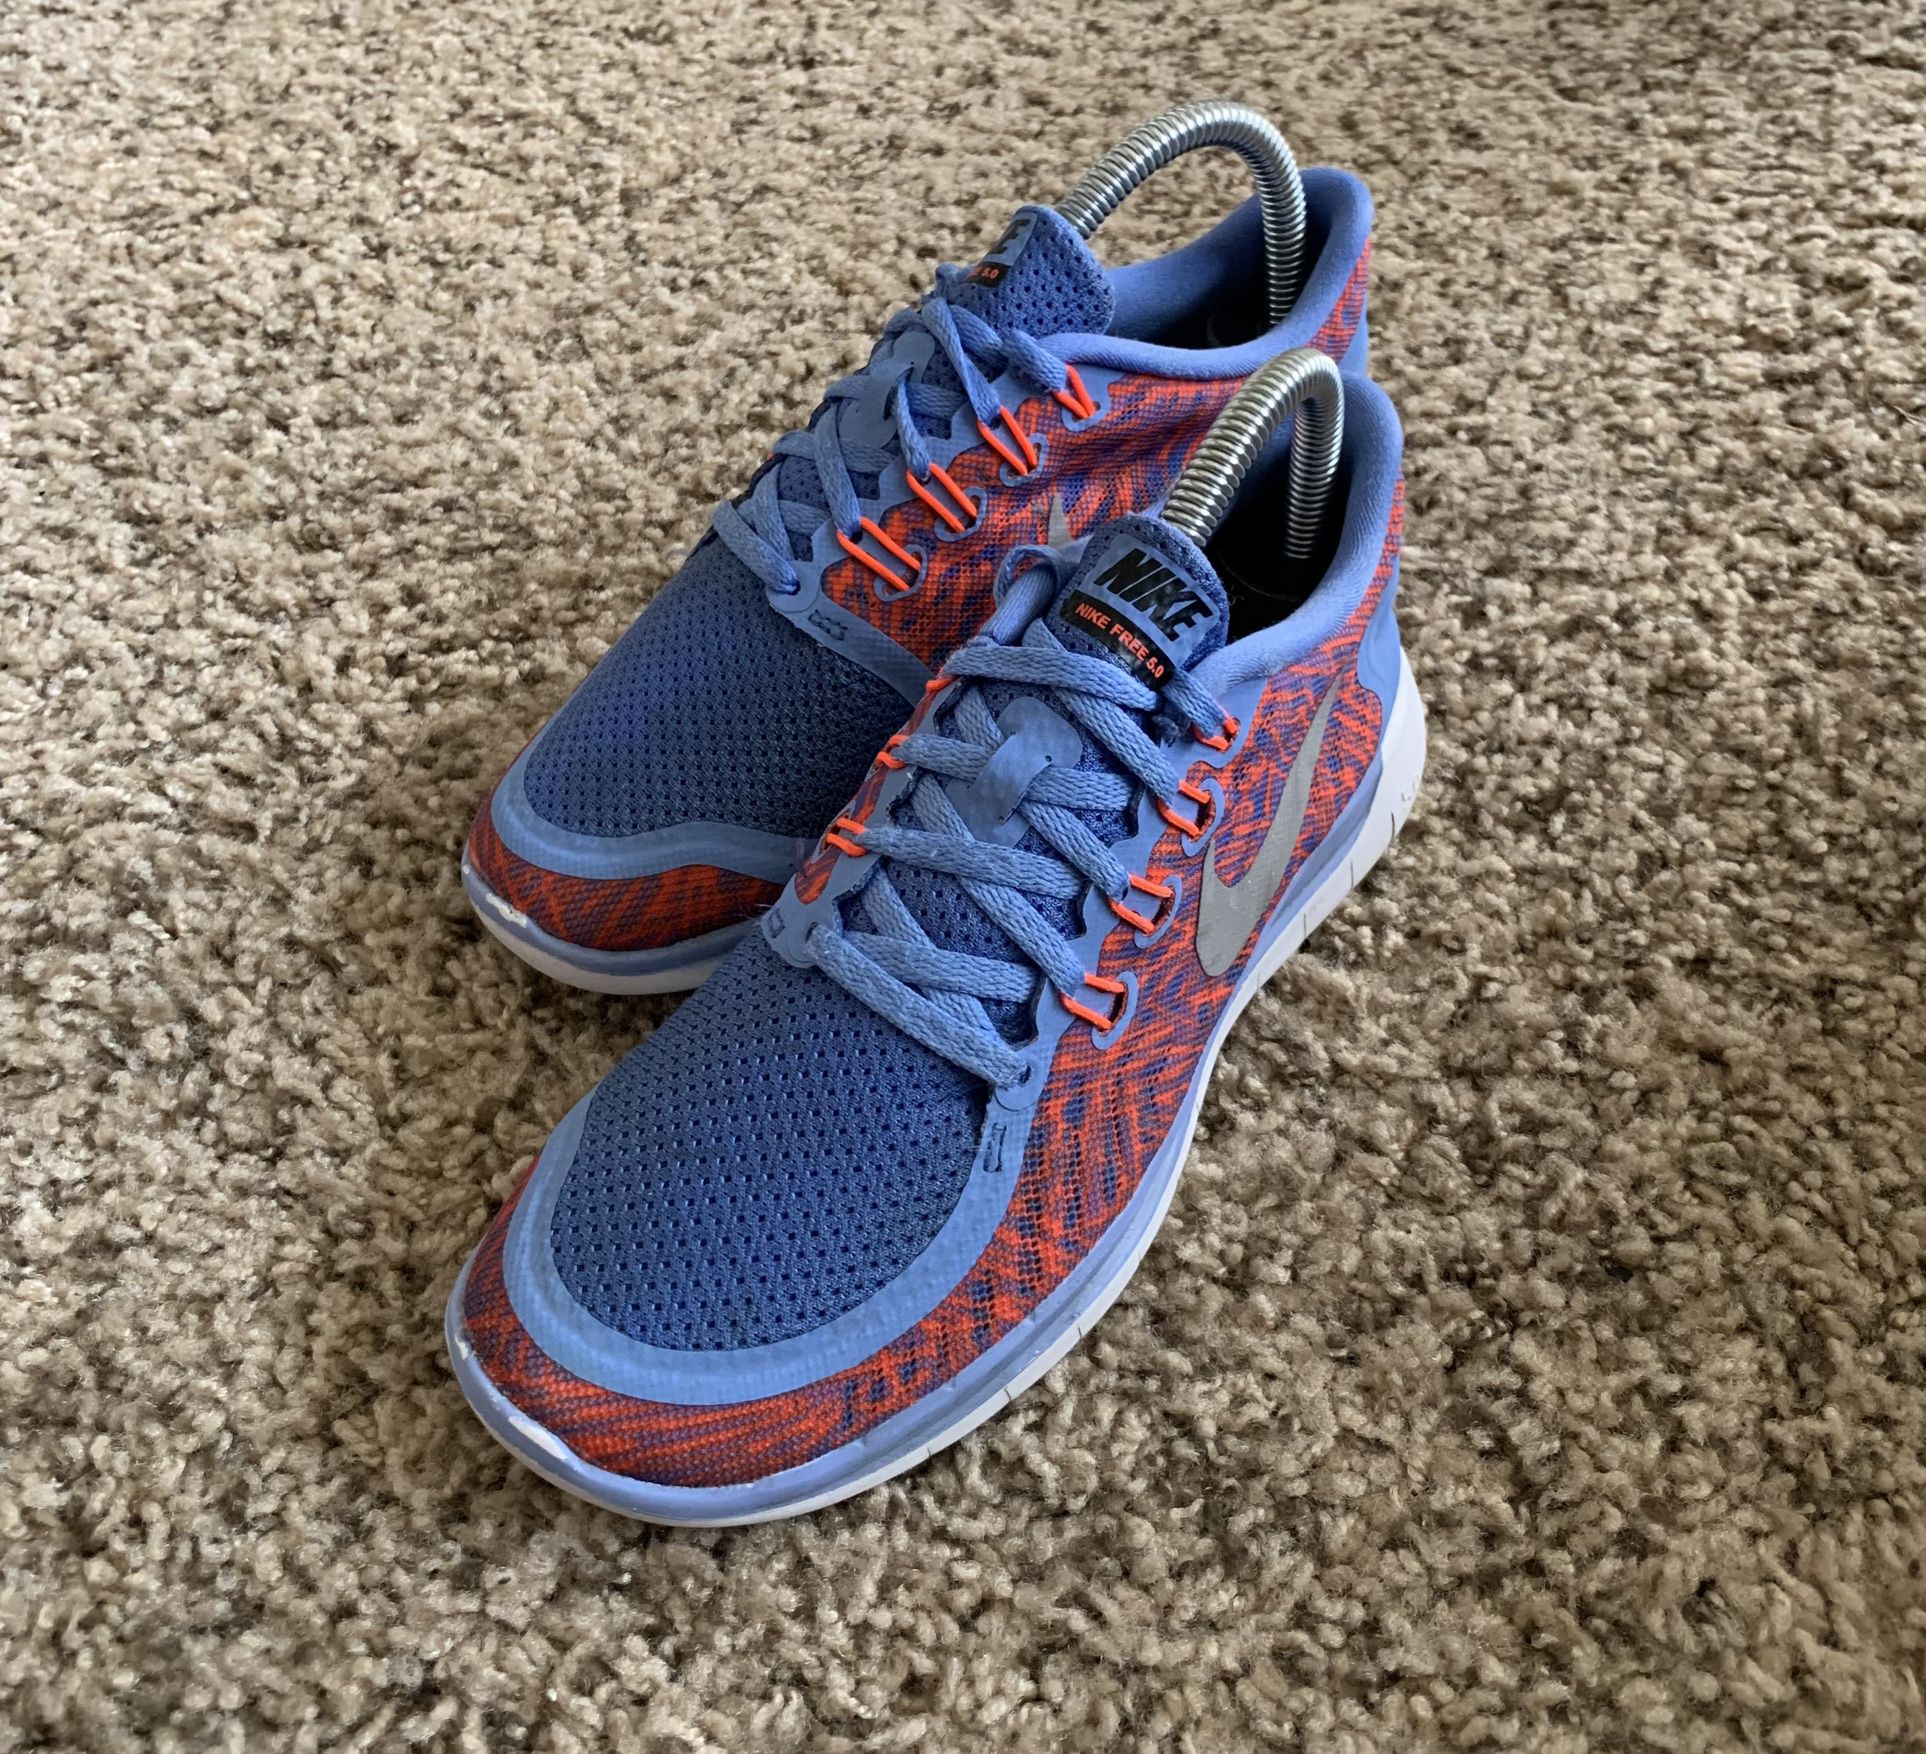 Free 5.0 Print Running Shoes Women's Size 6 for Sale in Dallas, TX OfferUp